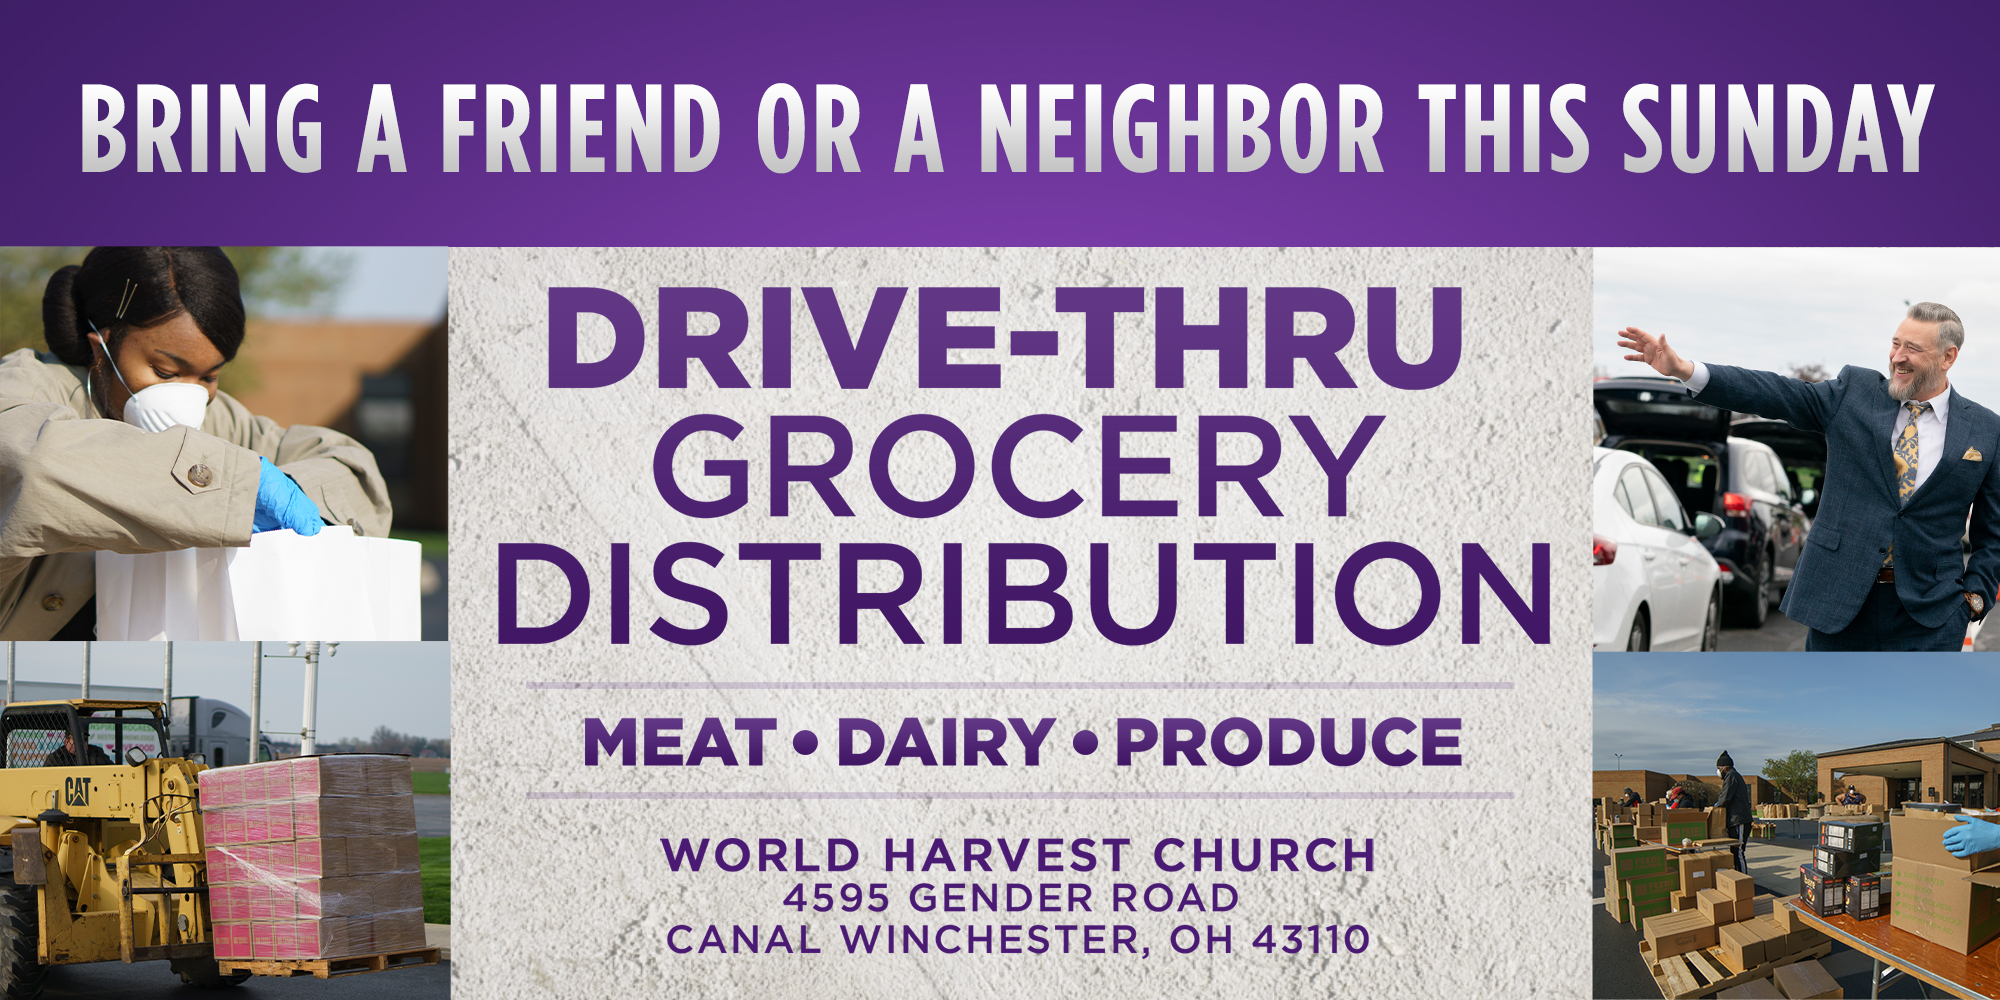 Bring a Friend or a Neighbor this Sunday Drive-Thry Grocery Distribution Meat Dairy Produce World Harvest Church Columbus 4945 Gender Road Canal Winchester, OH 43110